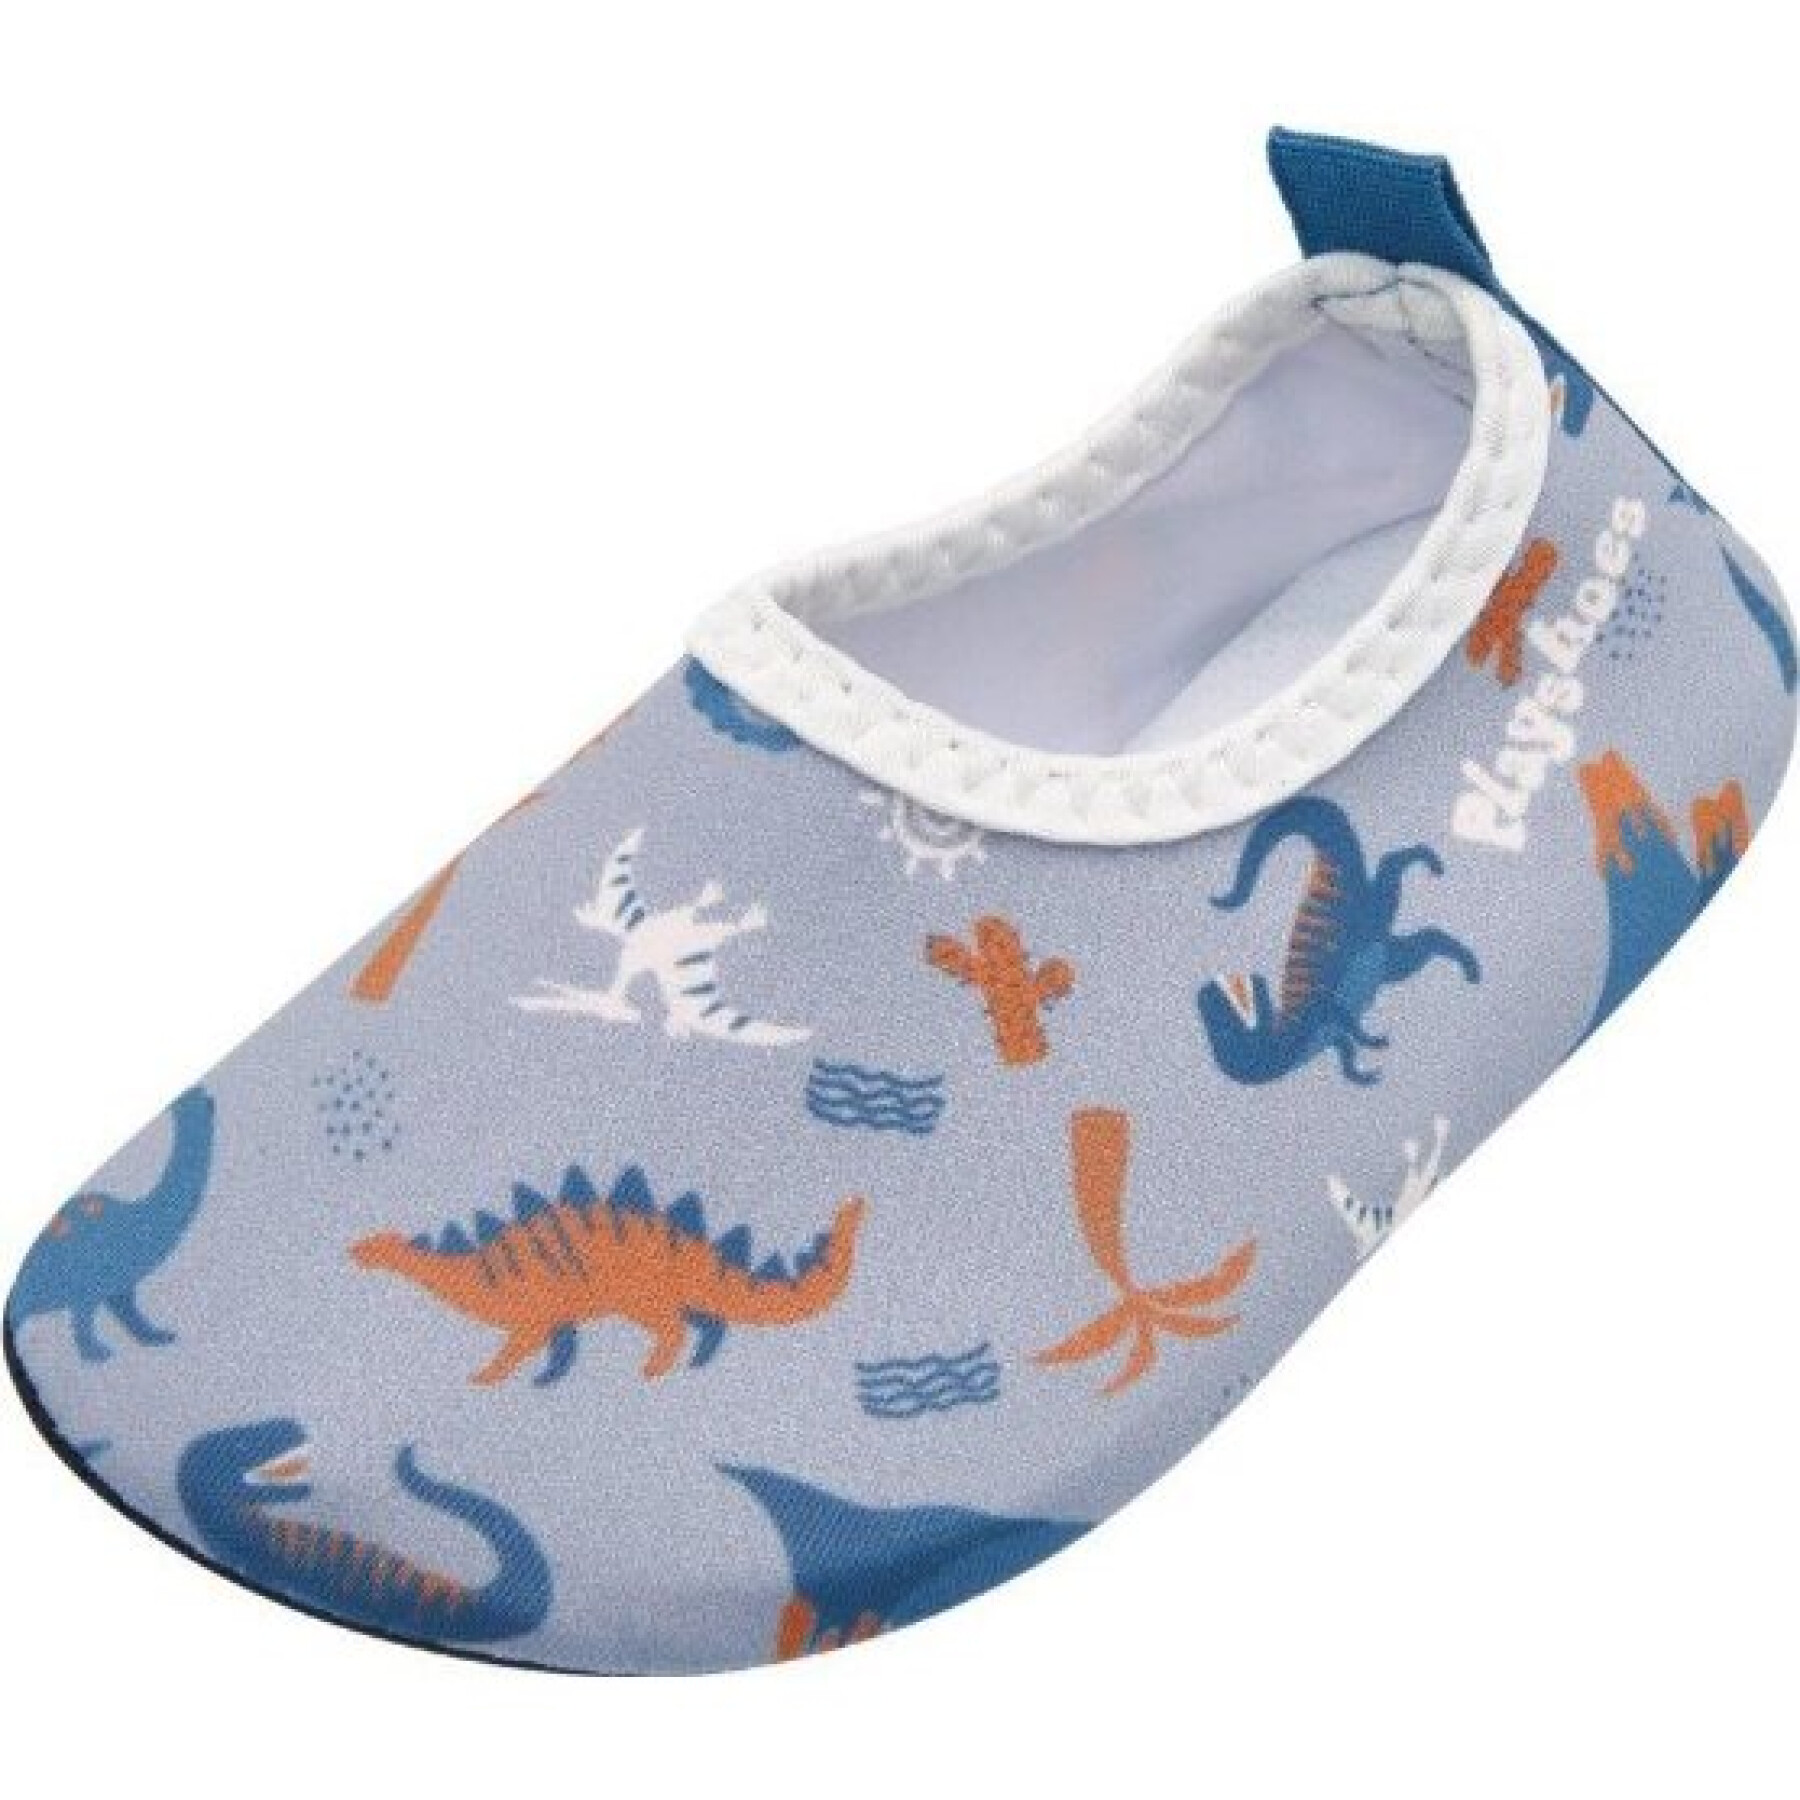 Children's water shoes Playshoes Dino Allover